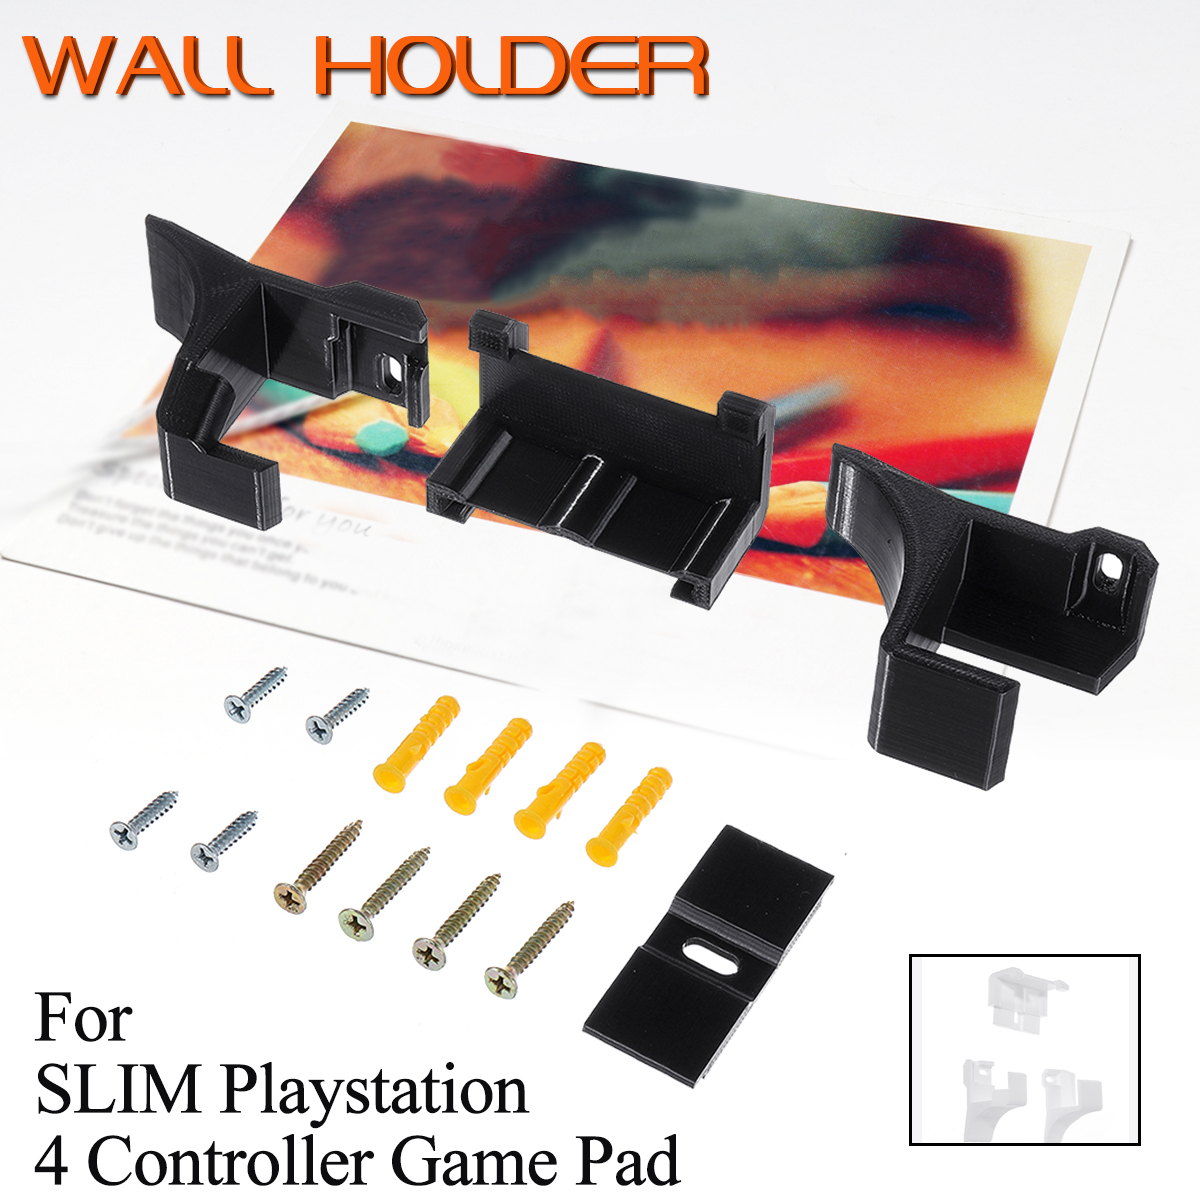 Wall Mount Bracket for Sony Playstation PS4 Pro Slim Console Stand Holder Handheld Stabilizer Bracket 61